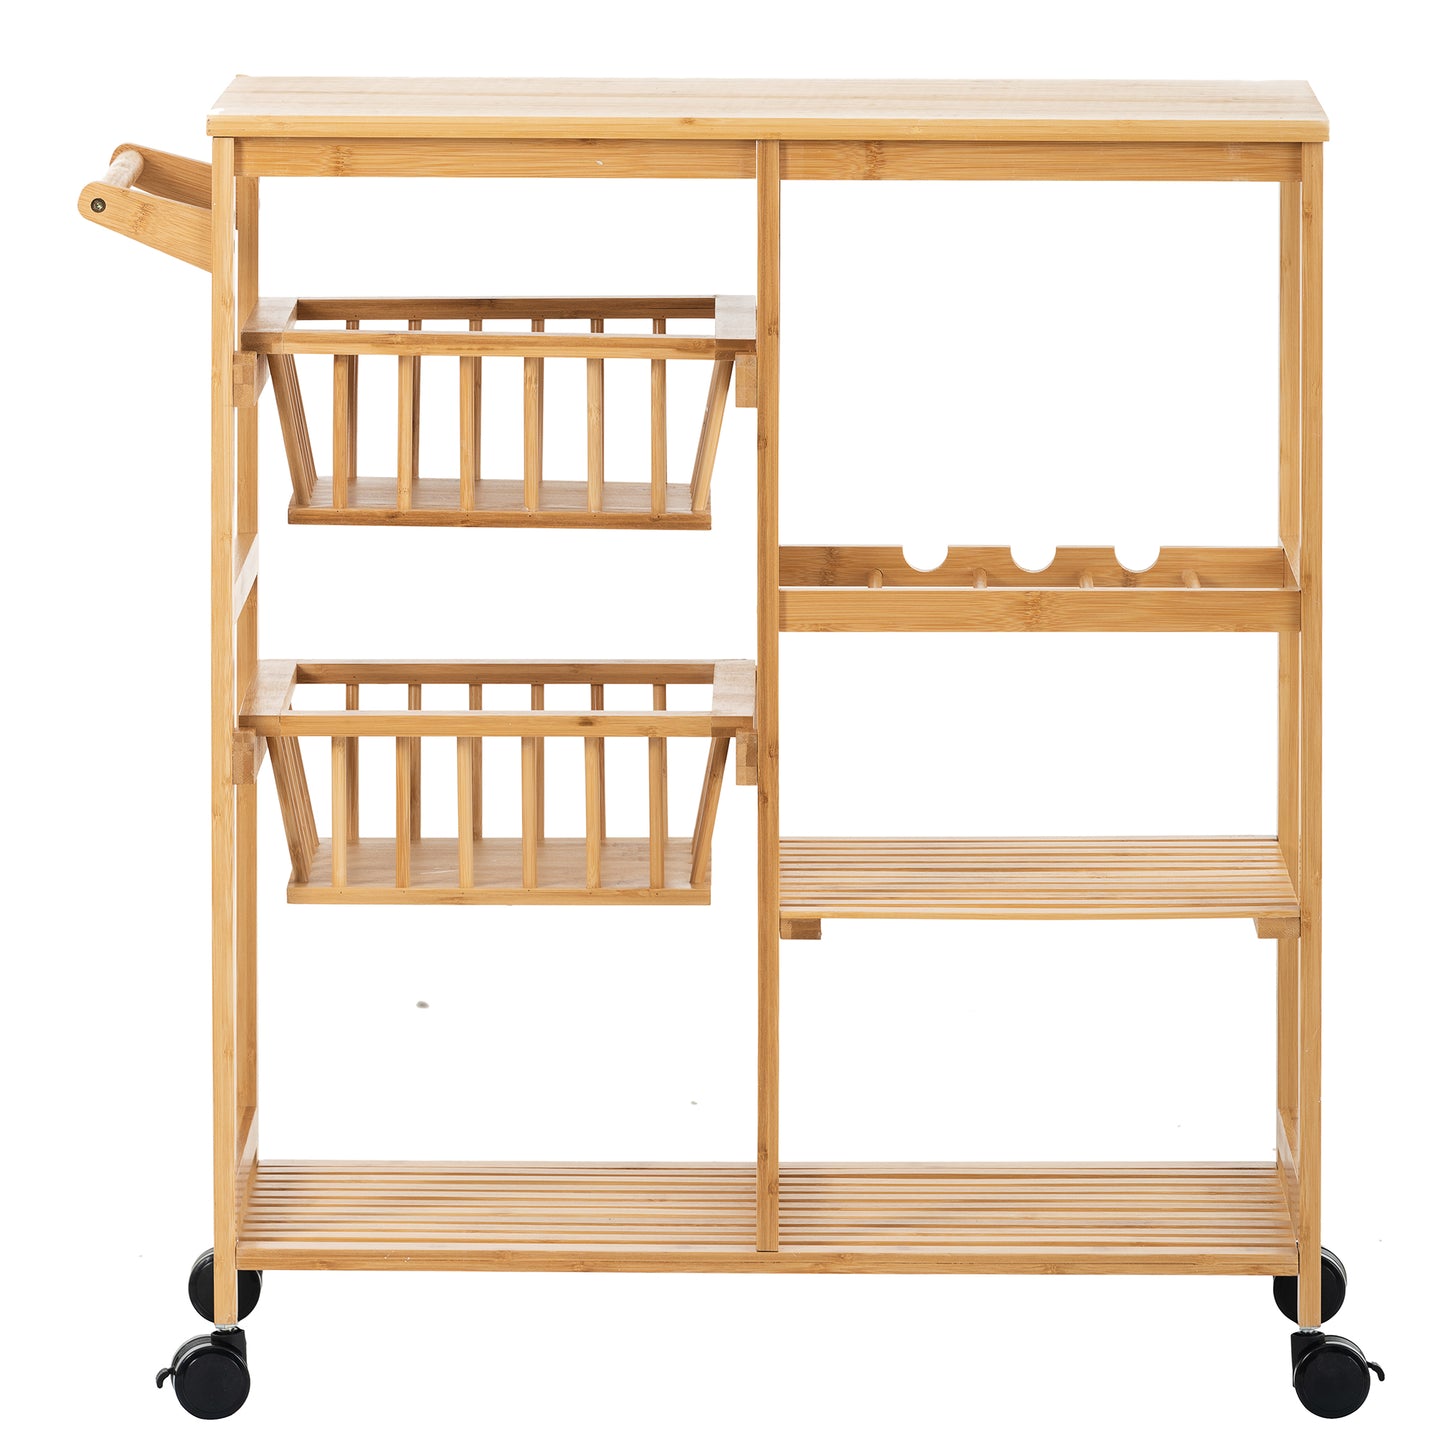 Rolling Kitchen Cart with Storage, BTMWAY Wood Kitchen Bakers Rack 3-Tier Utility Cart on Wheels, Counter Top Table Kitchen Microwave Cart with 2 Baskets, 3 Shelf, Walnut